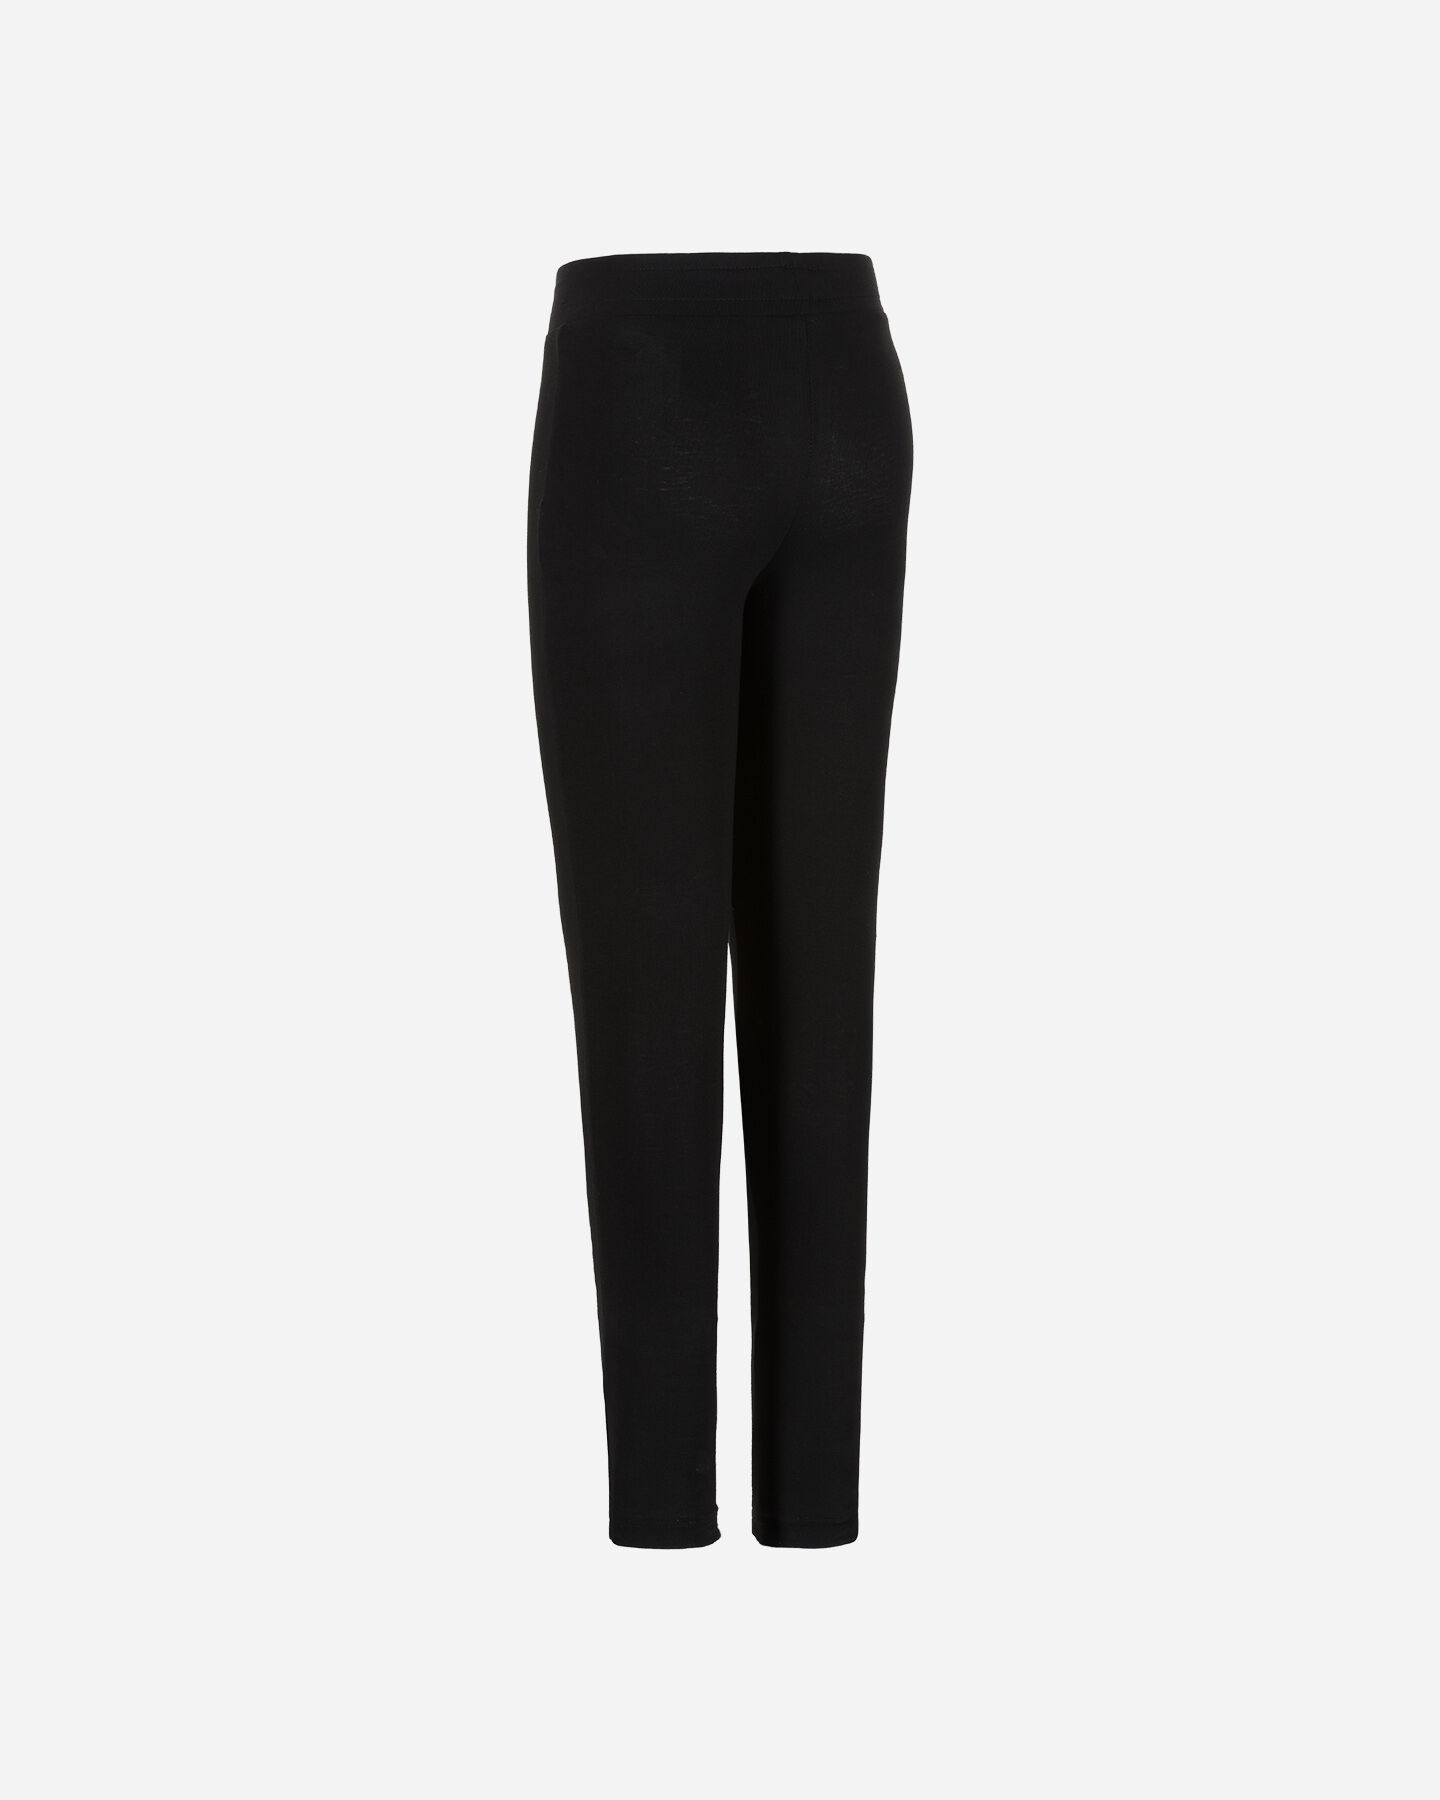  Leggings ADMIRAL JSTRETCH JR S4075514|050|4A scatto 1